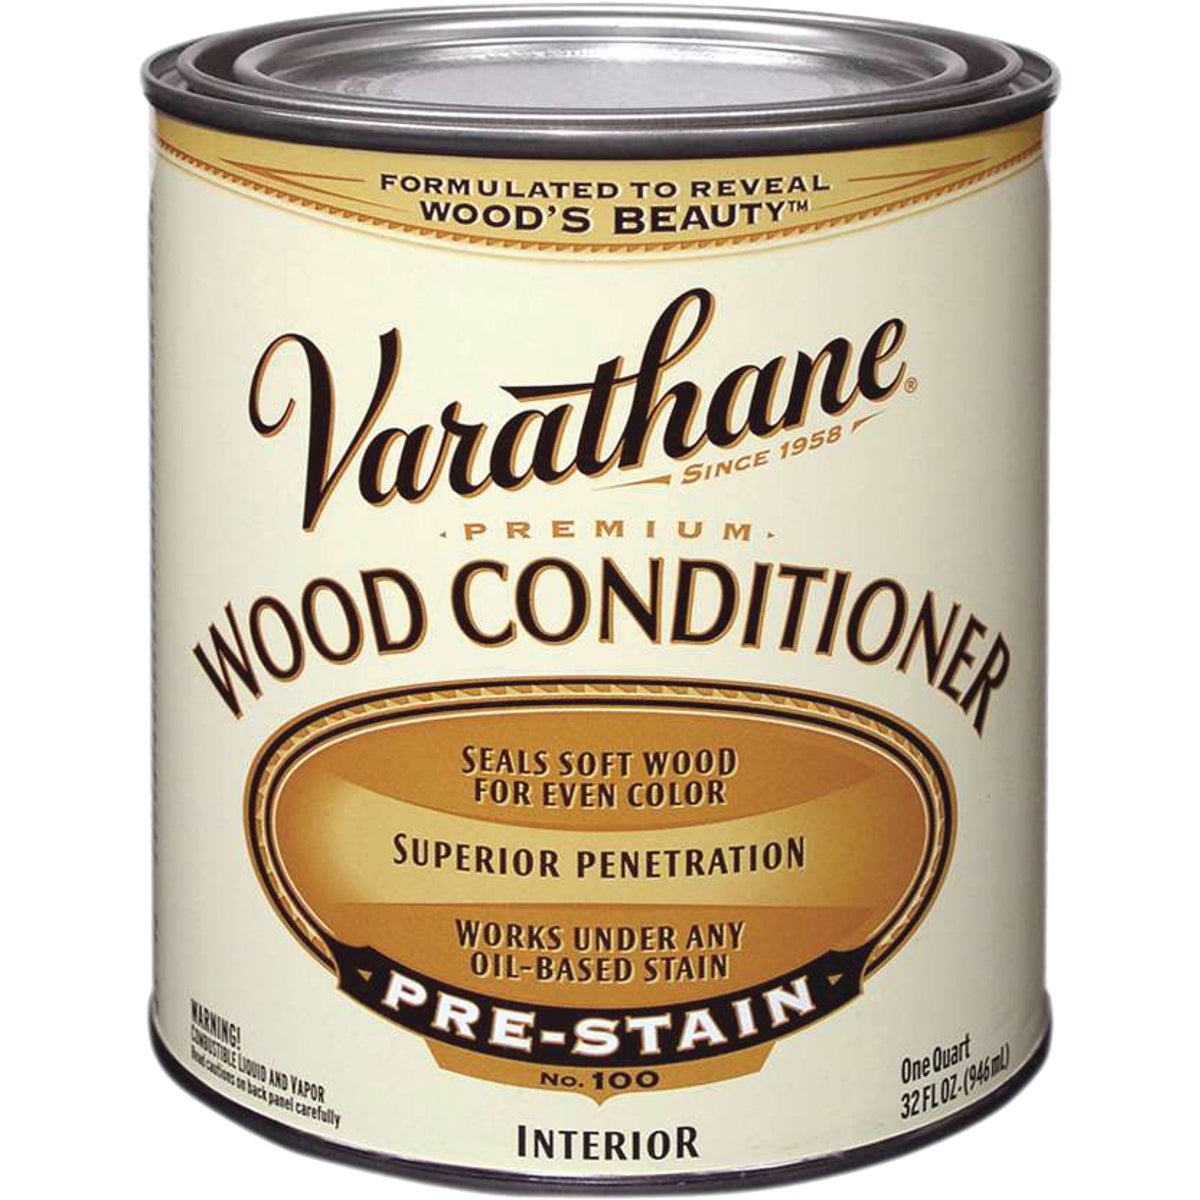 Item 788467, Protect furniture, cabinets, doors, trim, and paneling with wood 